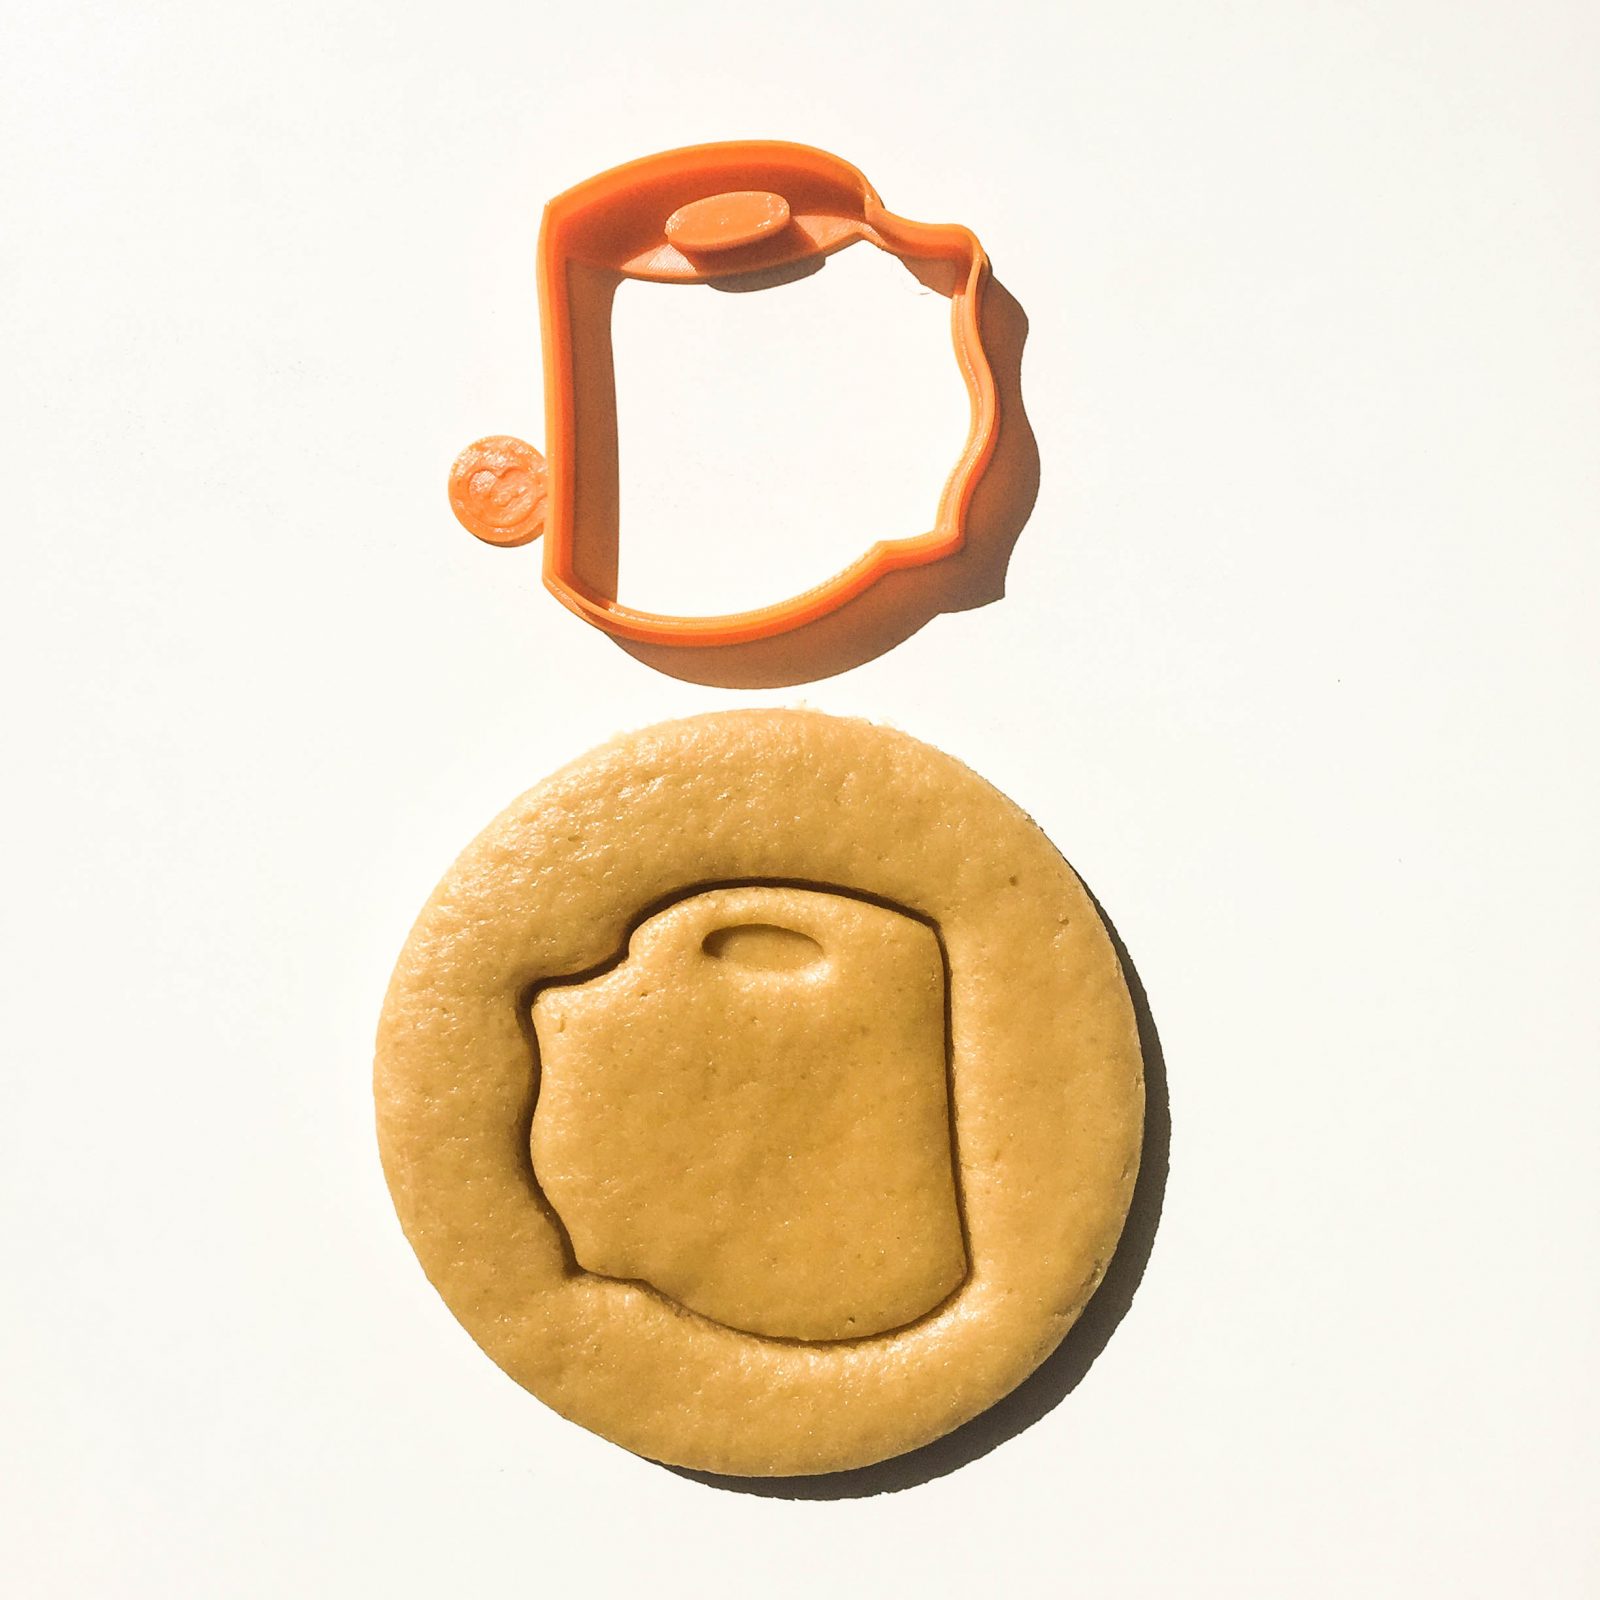 Loo Roll Cookie Cutter